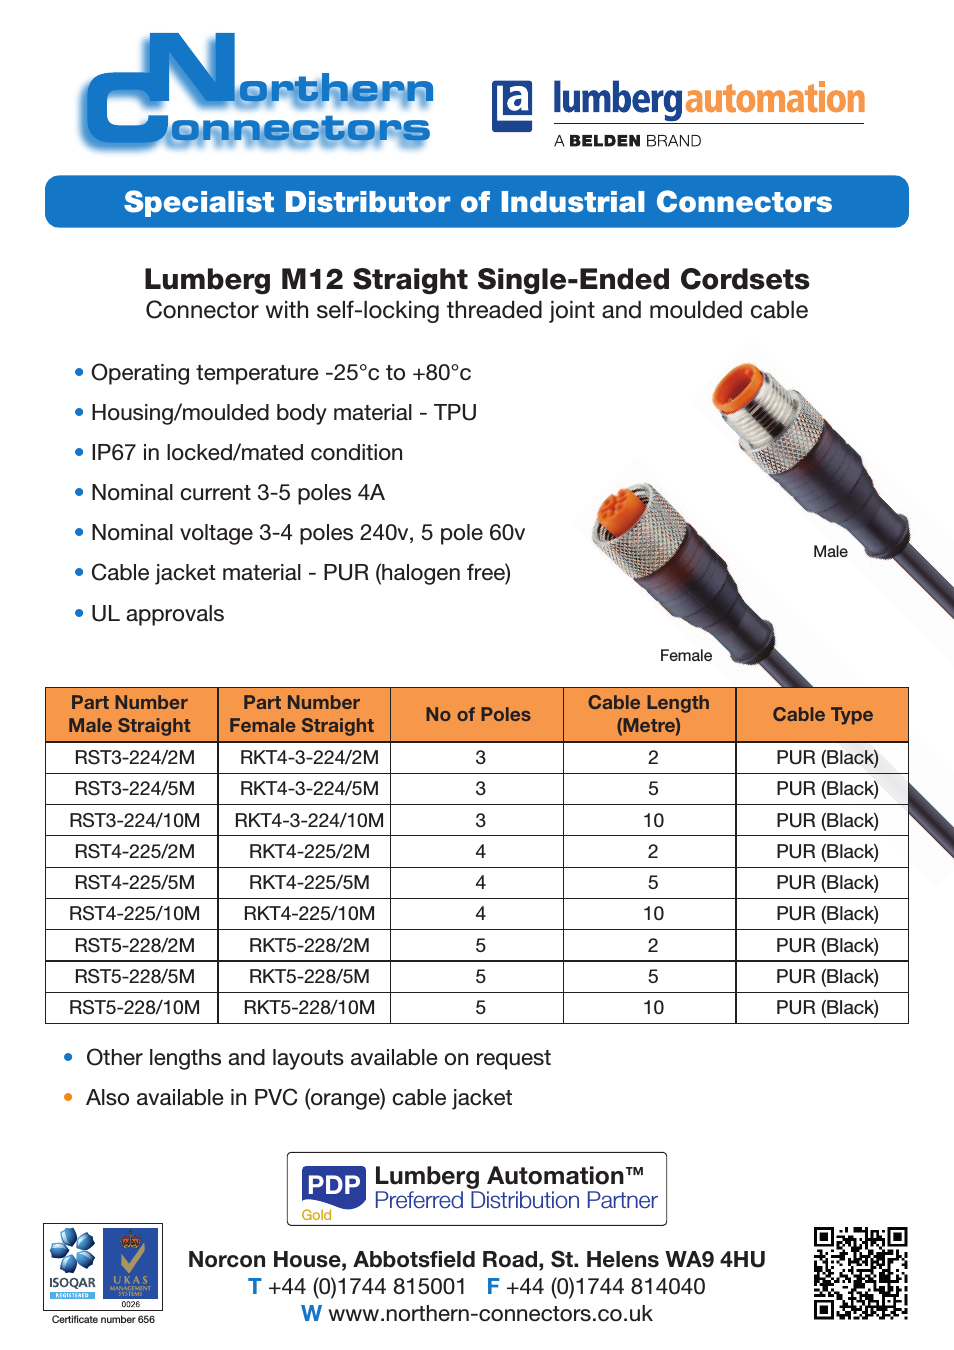 Lumberg Automation M12 Single-Ended Cordsets